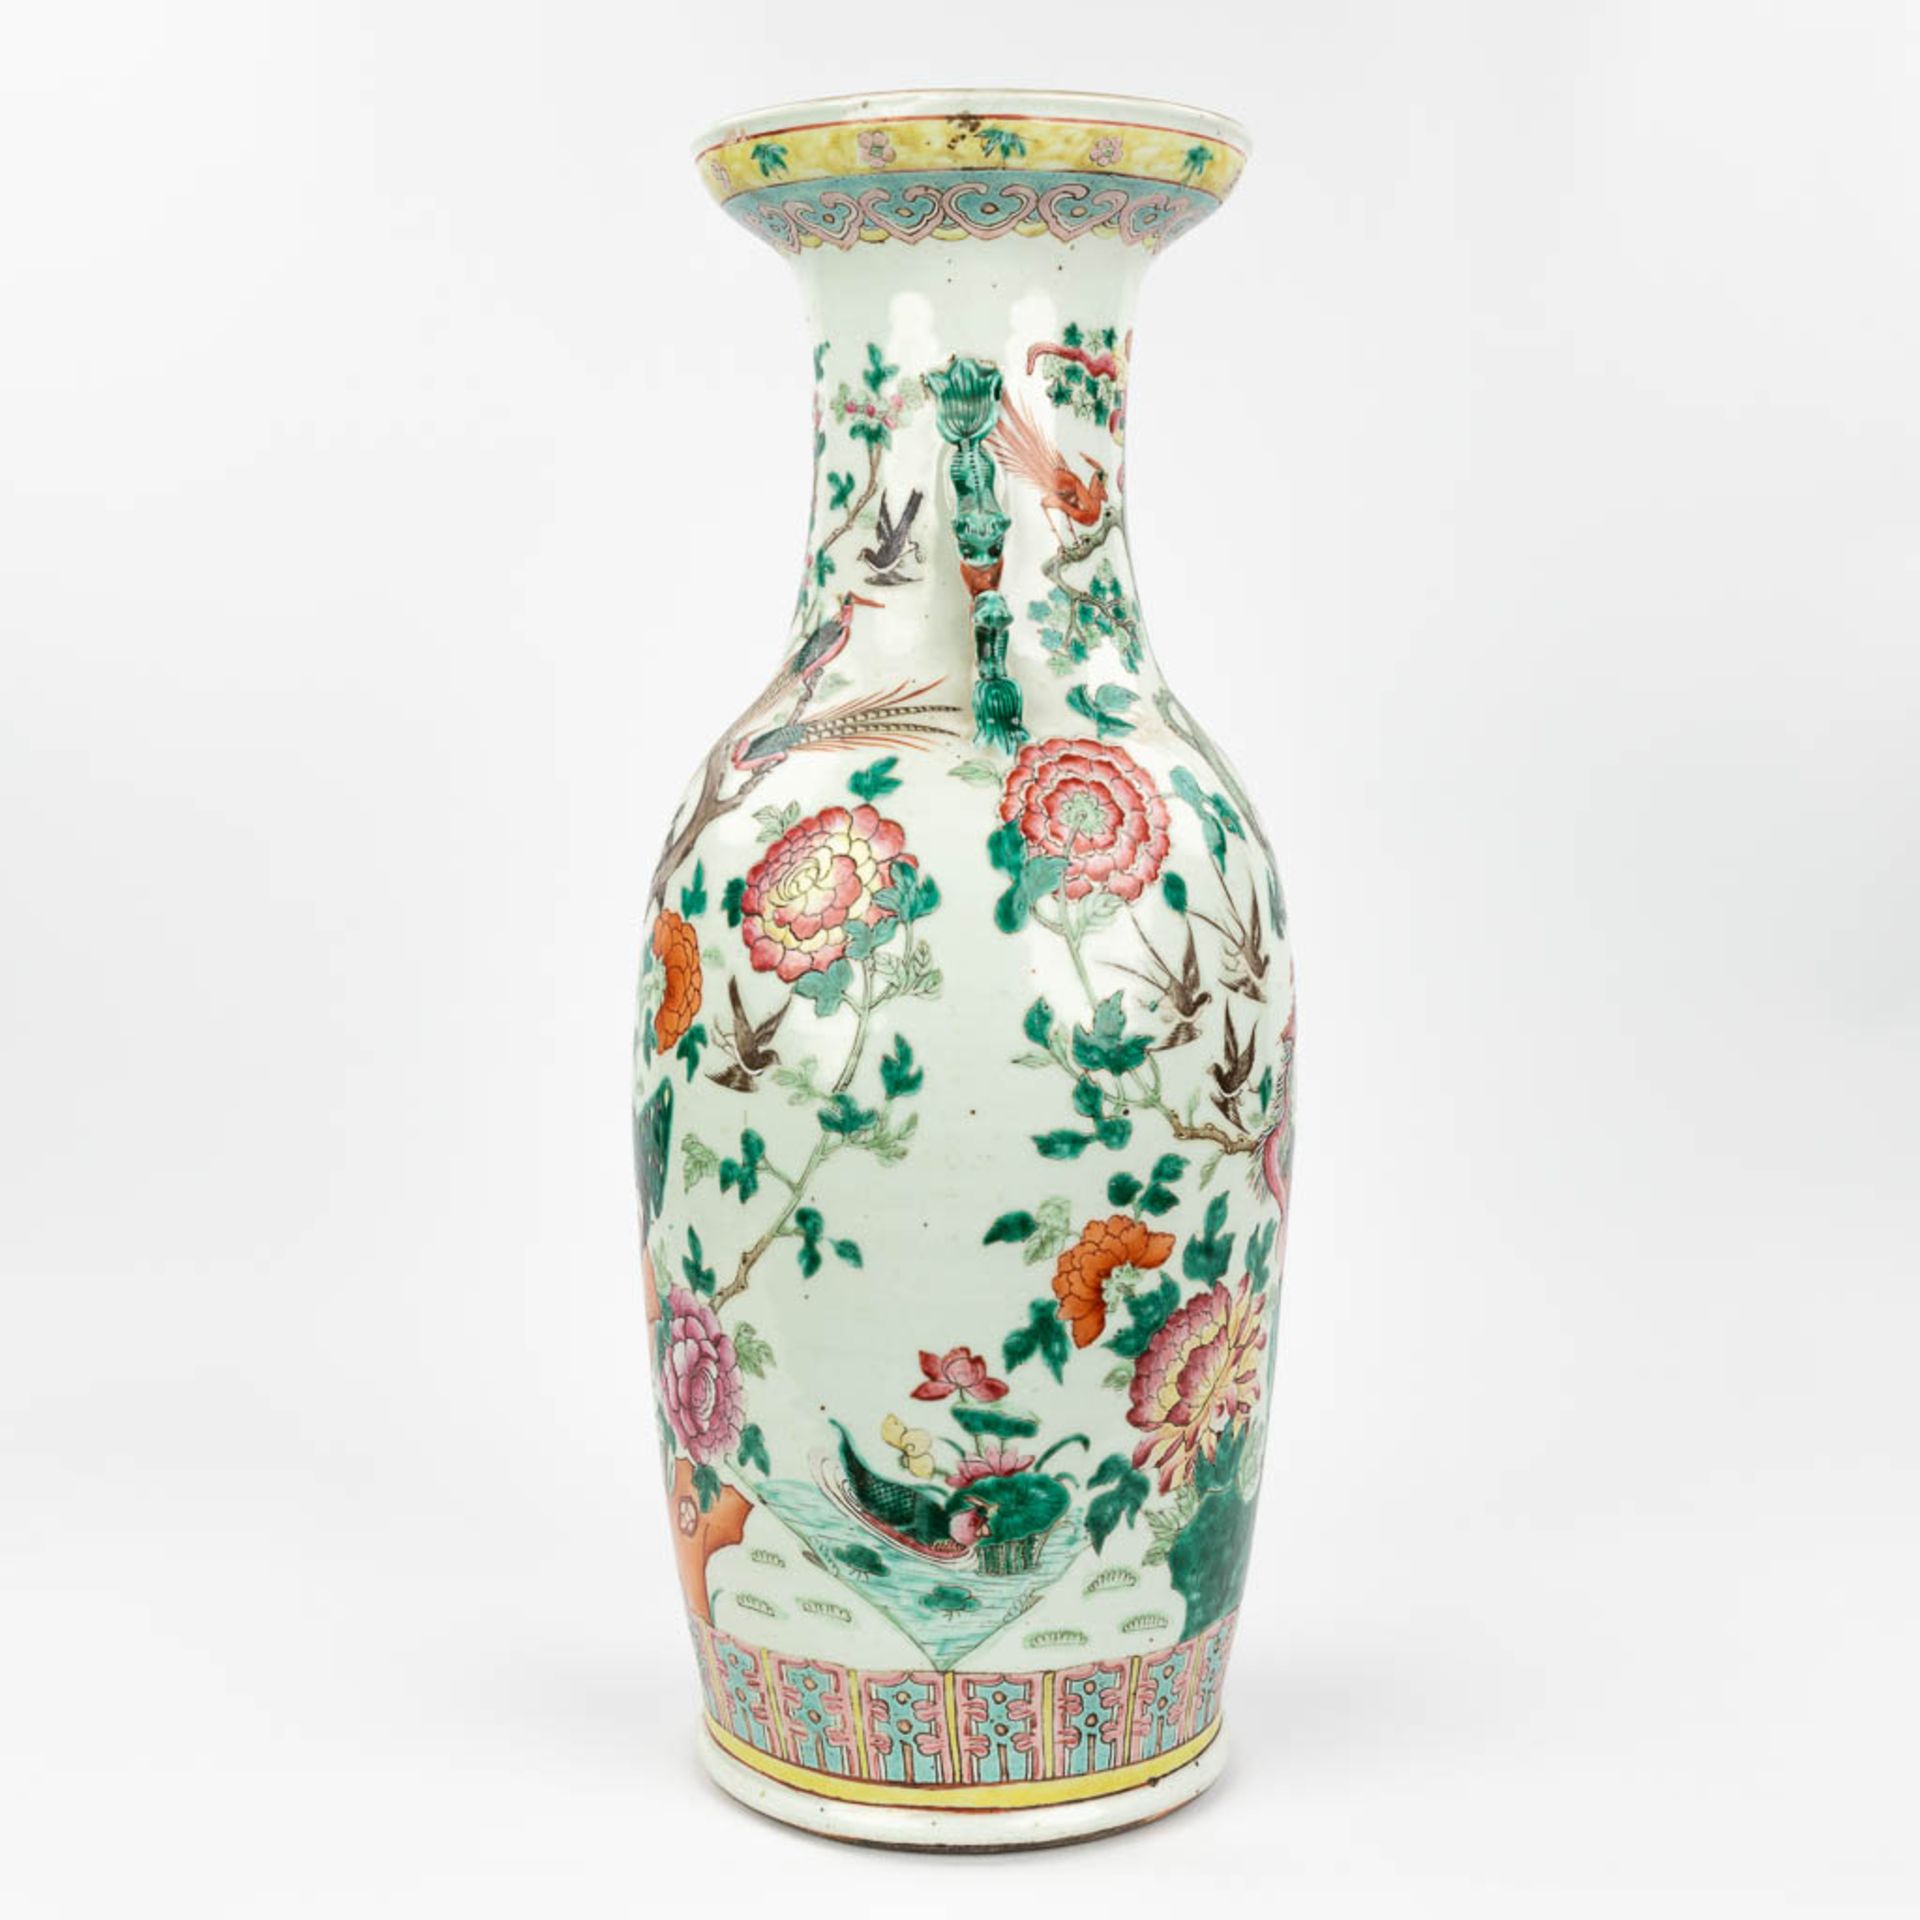 A Chinese vase made of porcelain, decorated with peacocks and birds. (61,5 x 24 cm) - Image 10 of 18